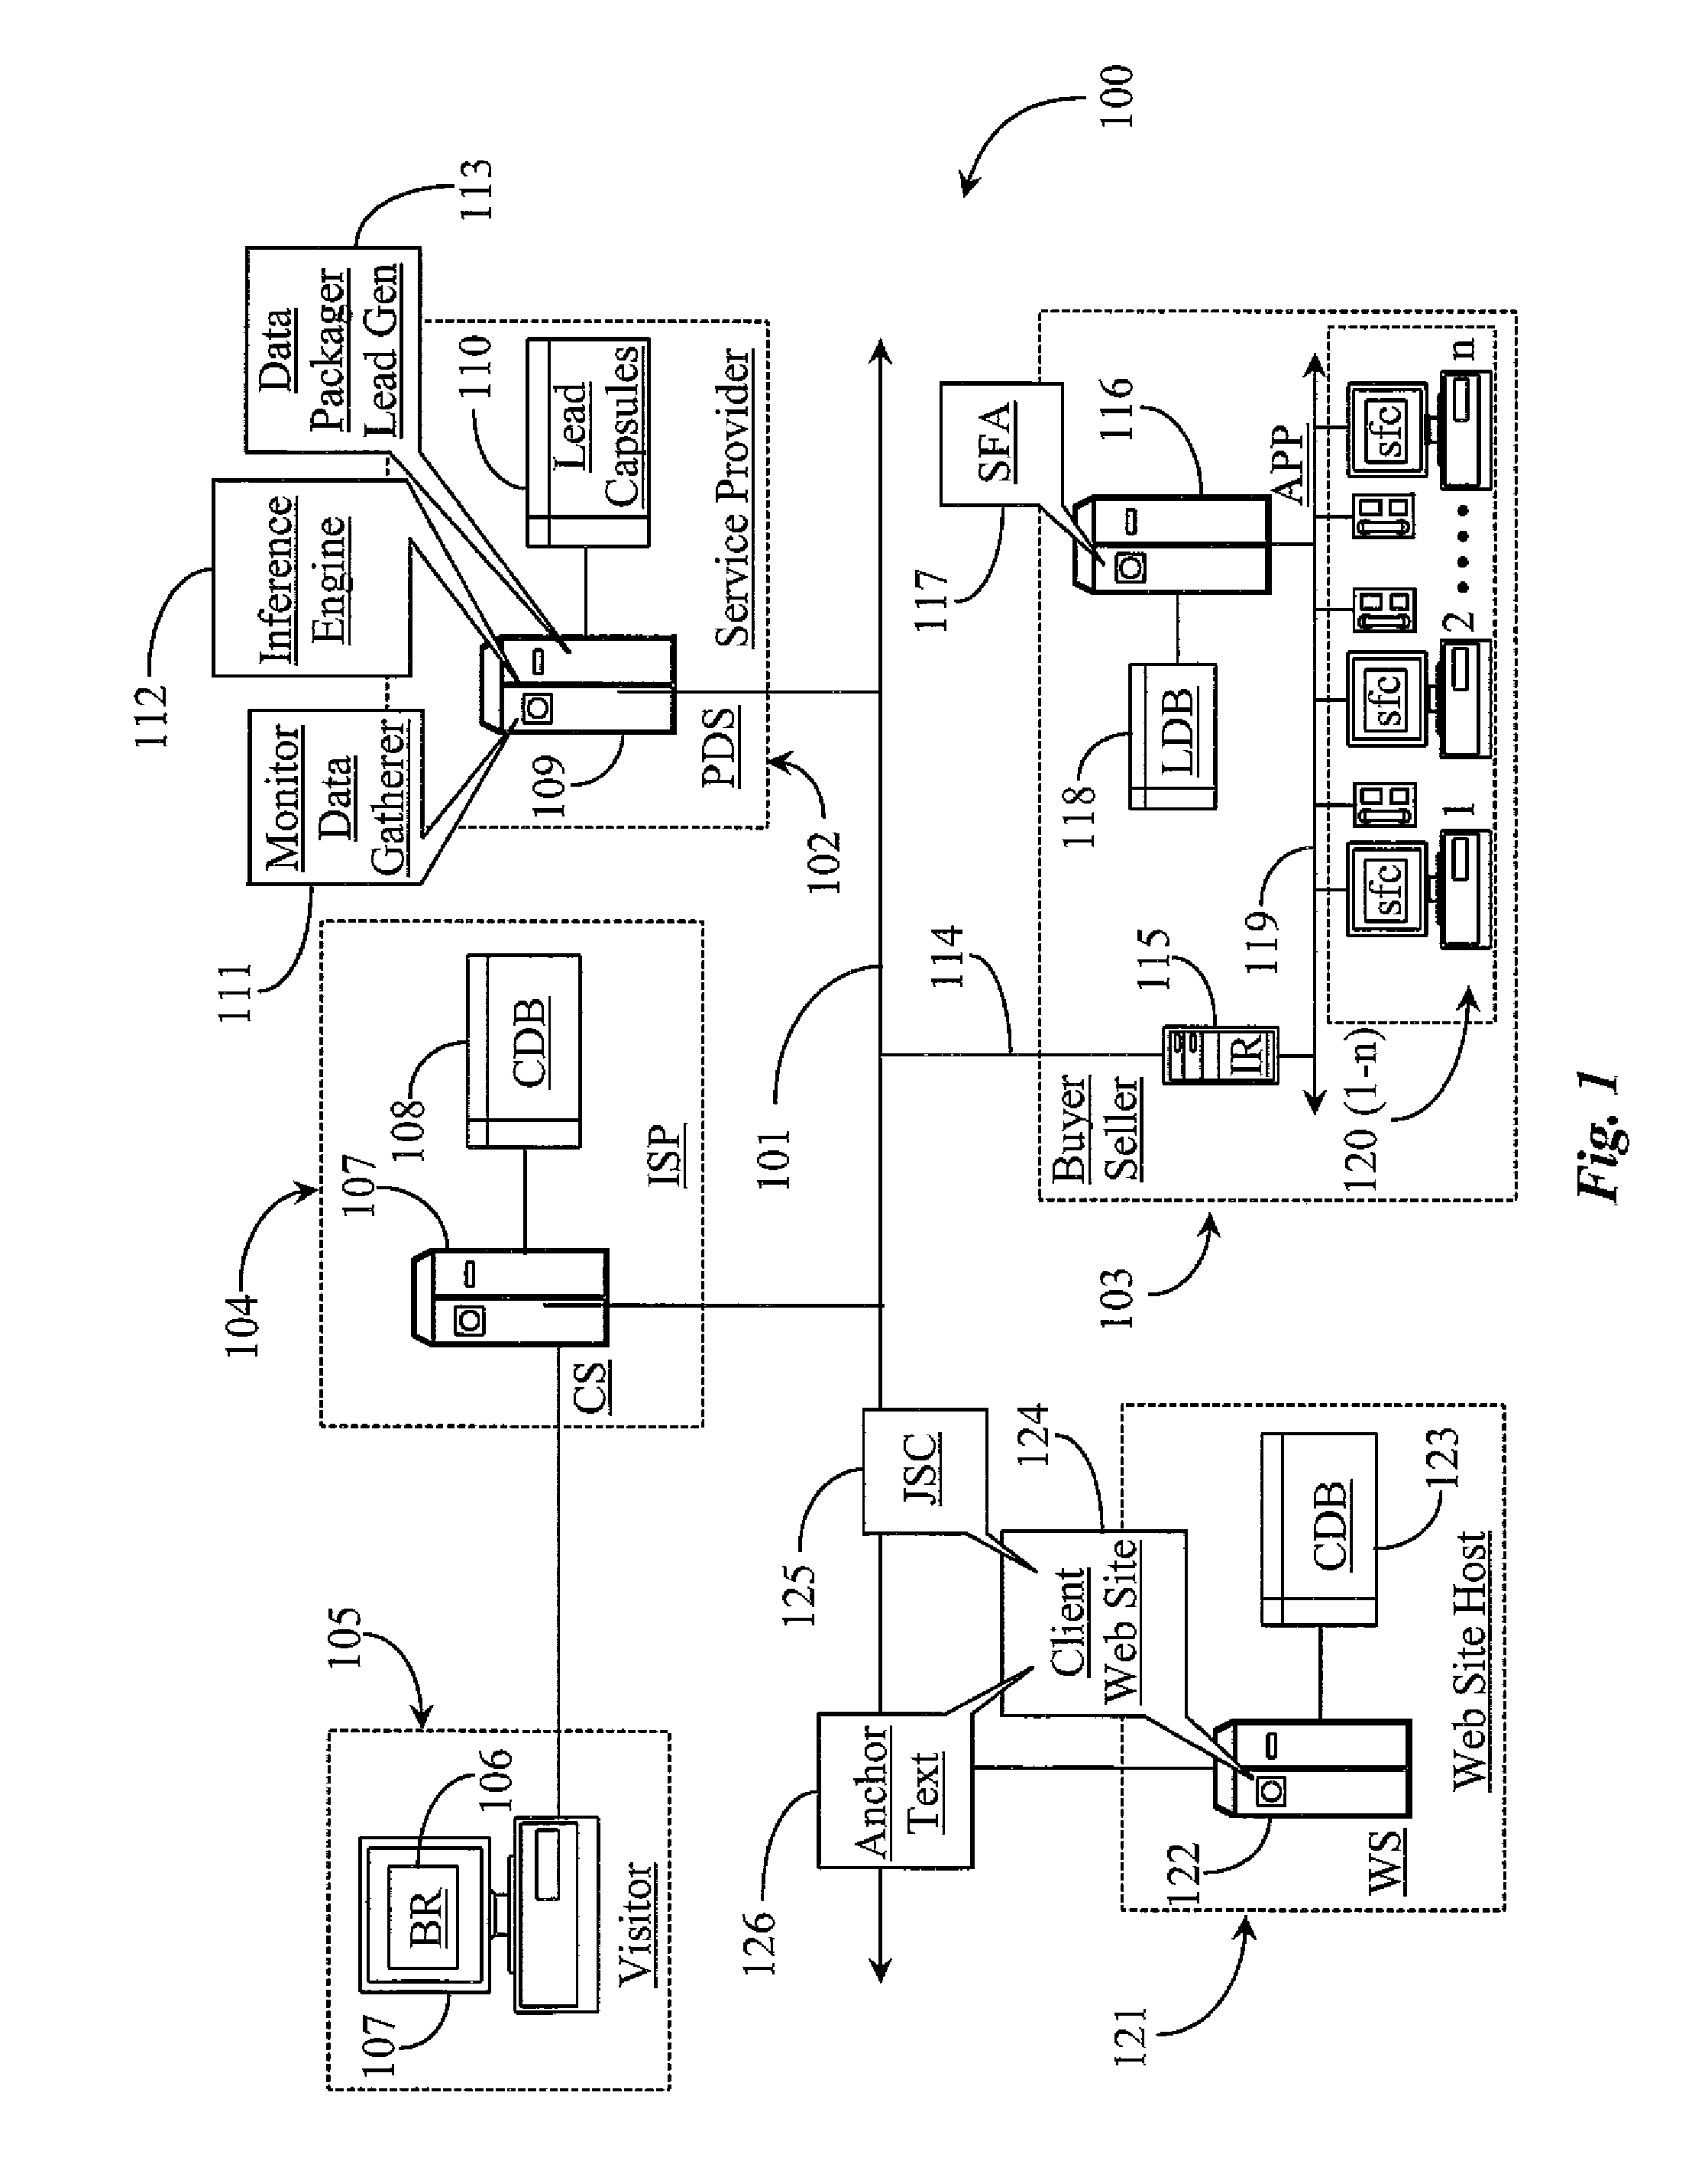 System and methods for inferring intent of website visitors and generating and packaging visitor information for distribution as sales leads or market intelligence